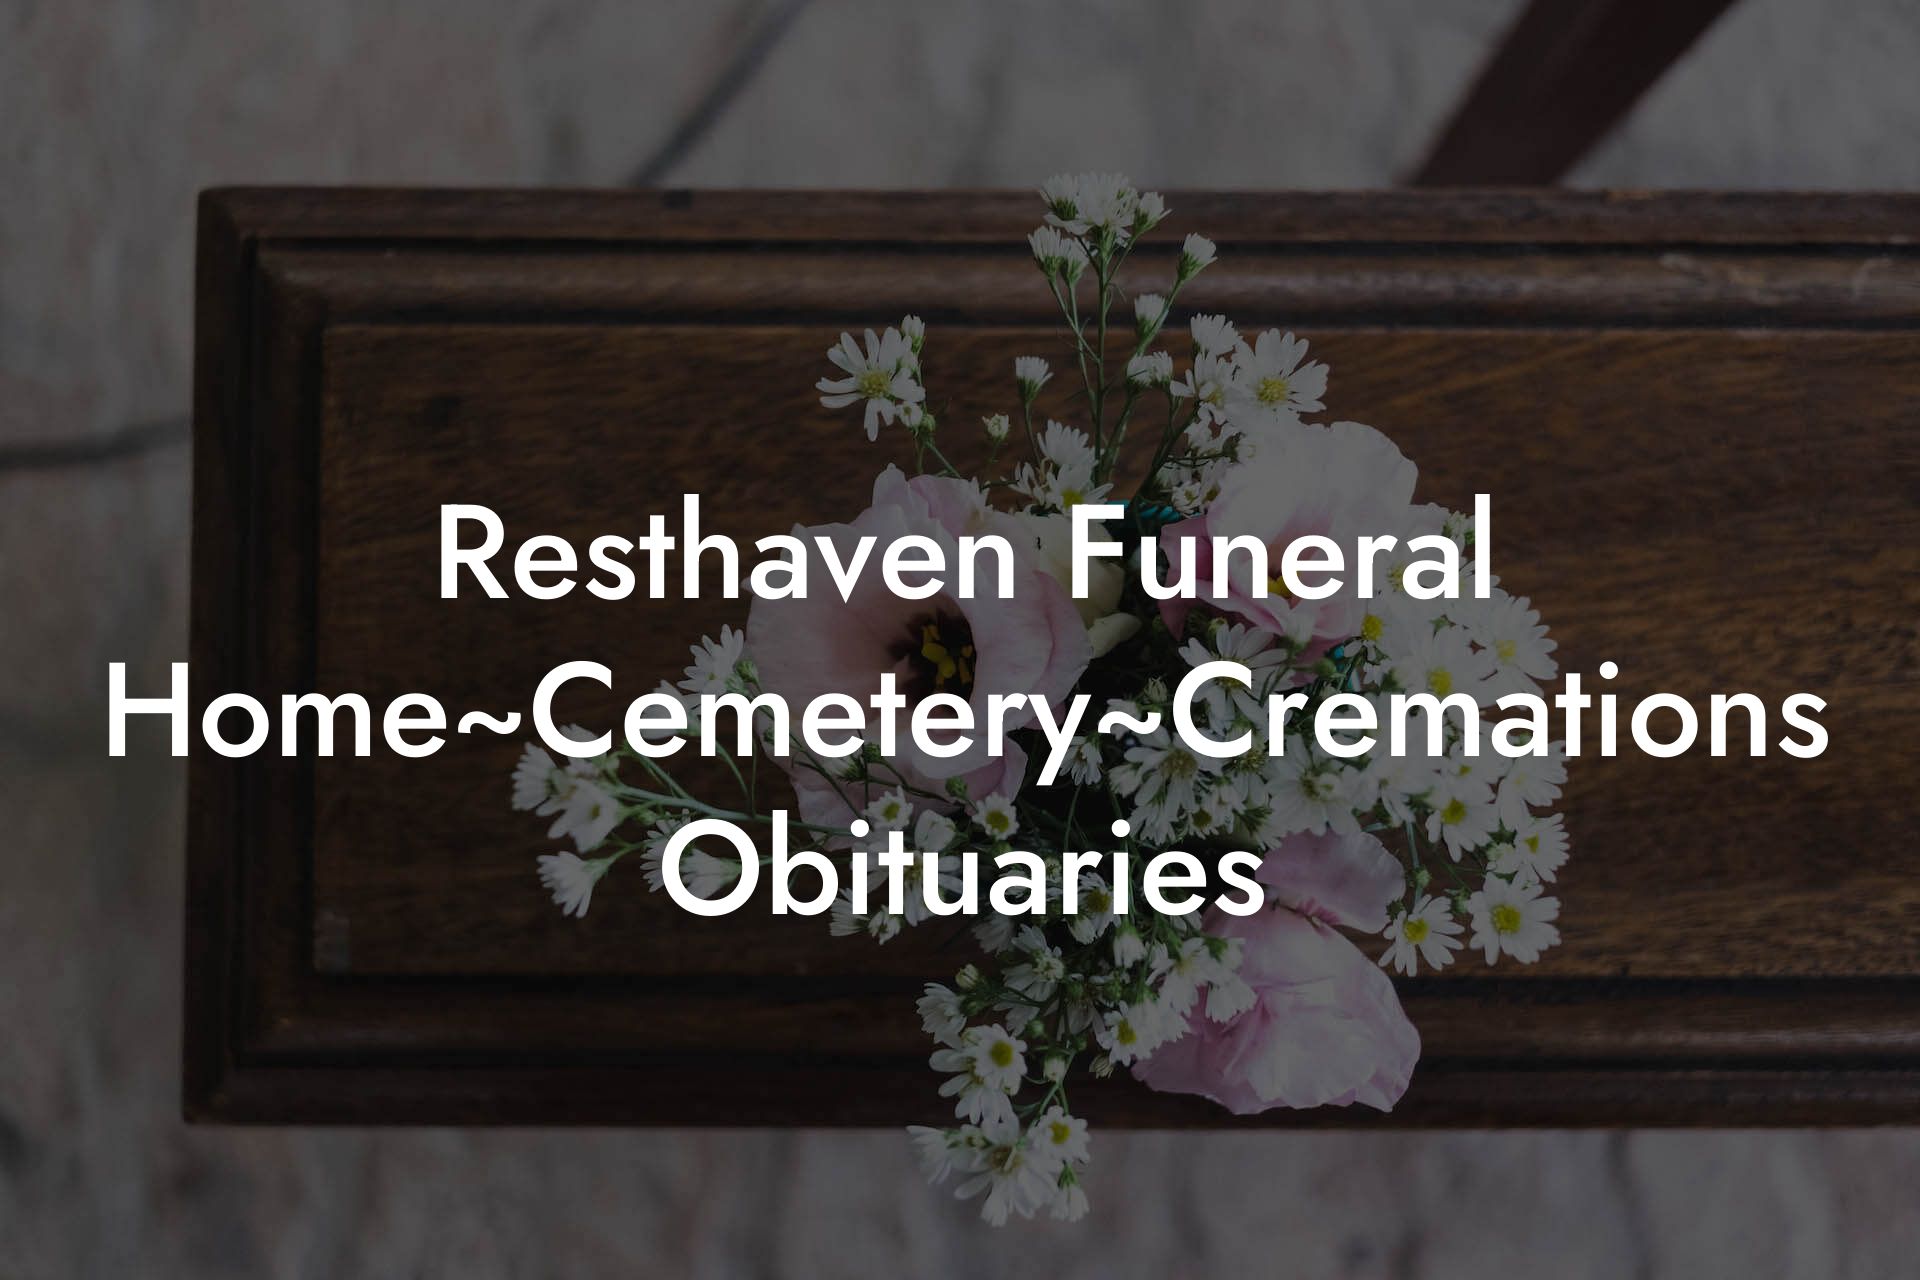 Resthaven Funeral Home~Cemetery~Cremations Obituaries